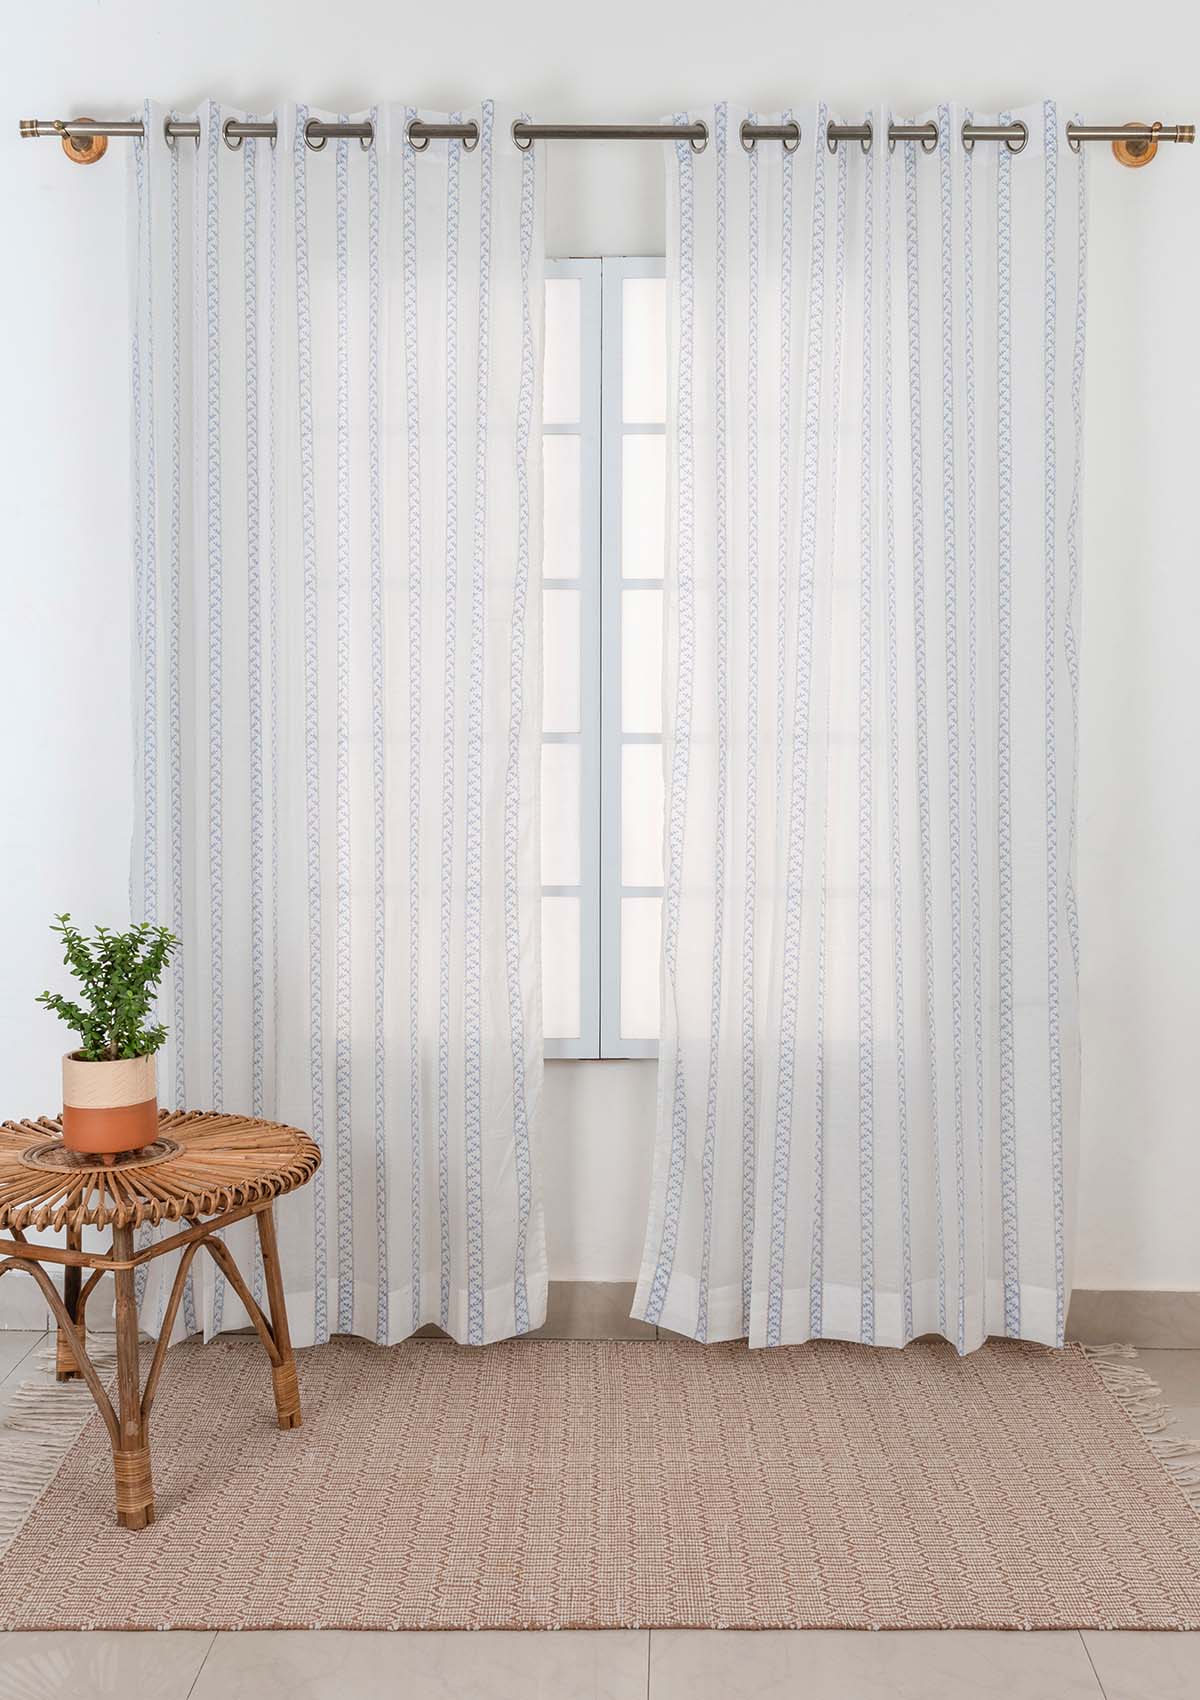 Oriental Stripes 100% Cotton Sheer Geometric curtain for Living room & bedroom - Light filtering - Powder Blue - Pack of 1